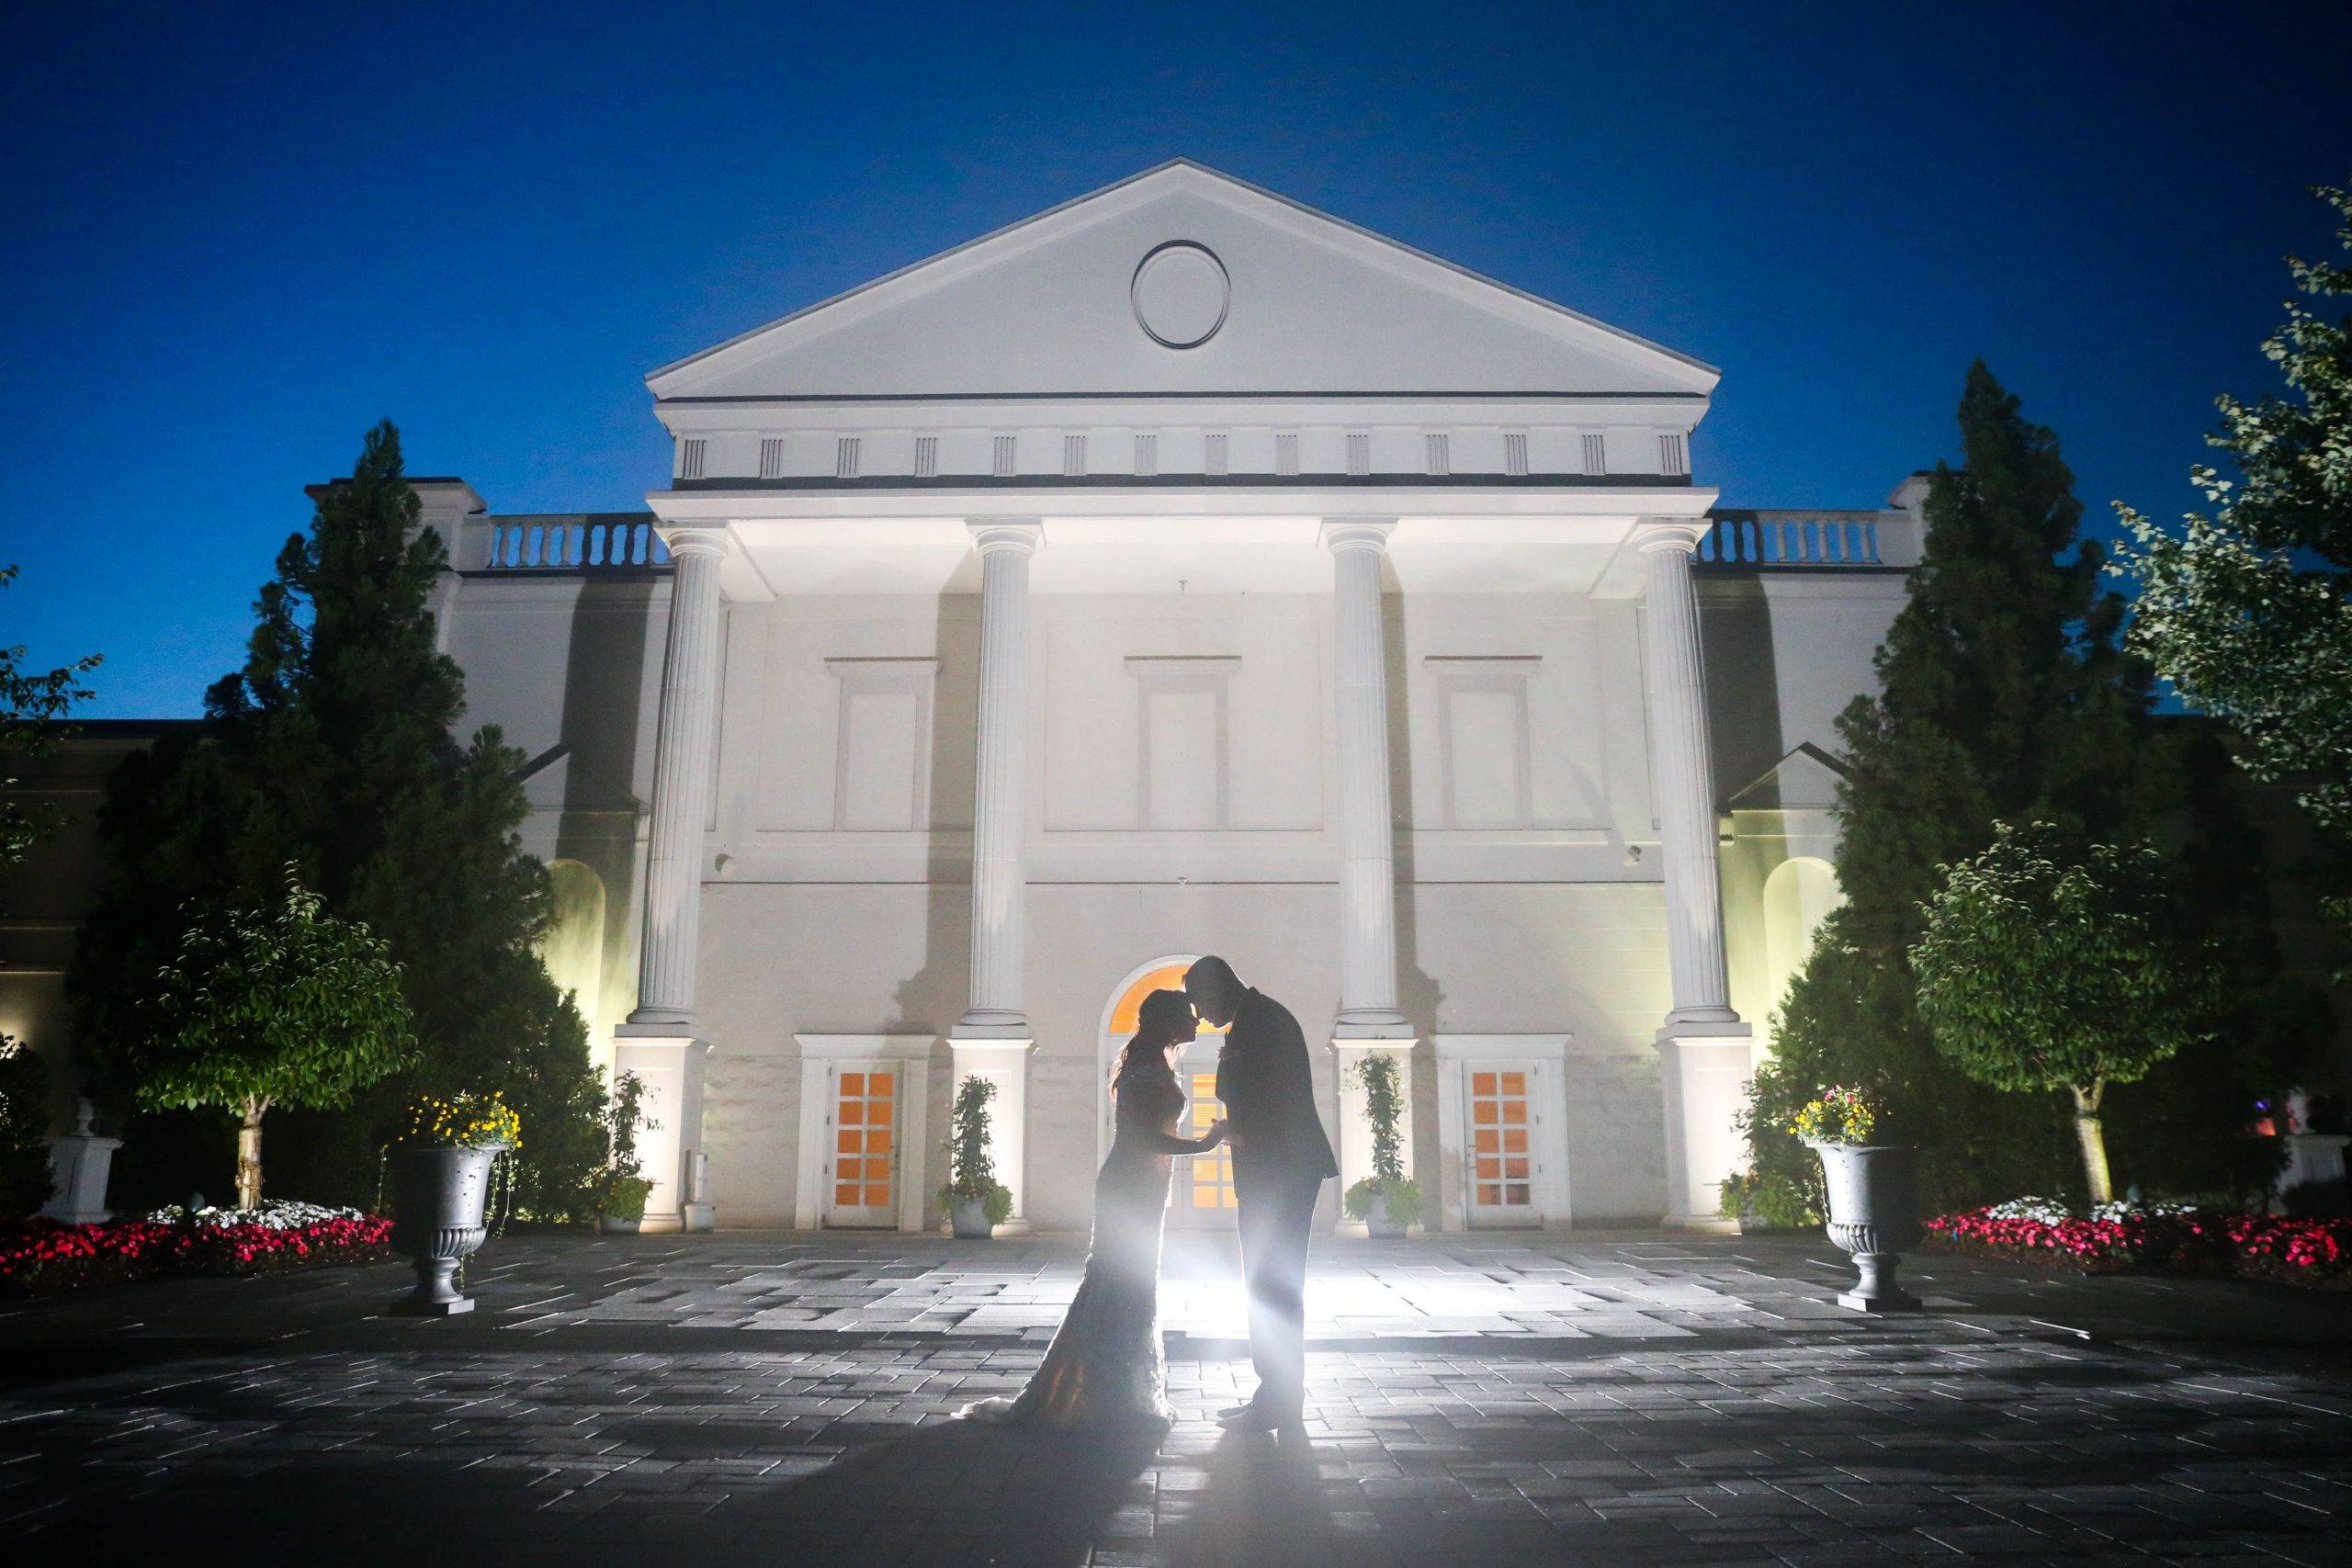 A bride and groom standing in front of a white building at night.